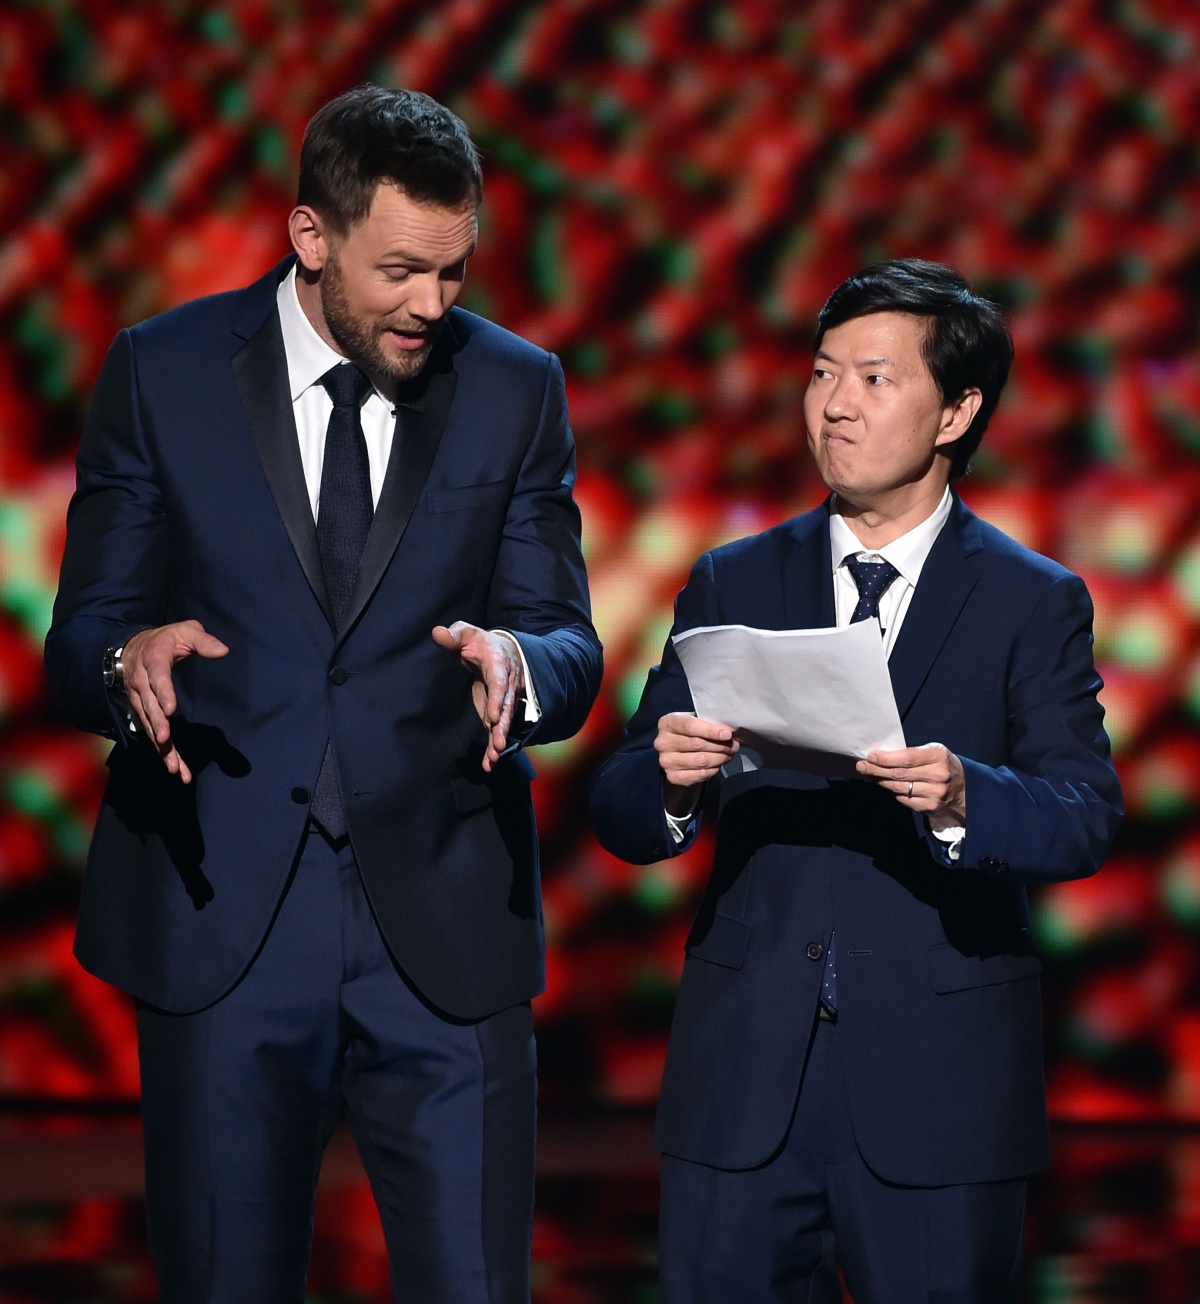 Host Joel McHale (L) and actor Ken Jeong speak onstage during The 2015 ESPYS at Microsoft Theater on July 15, 2015 in Los Angeles, California.